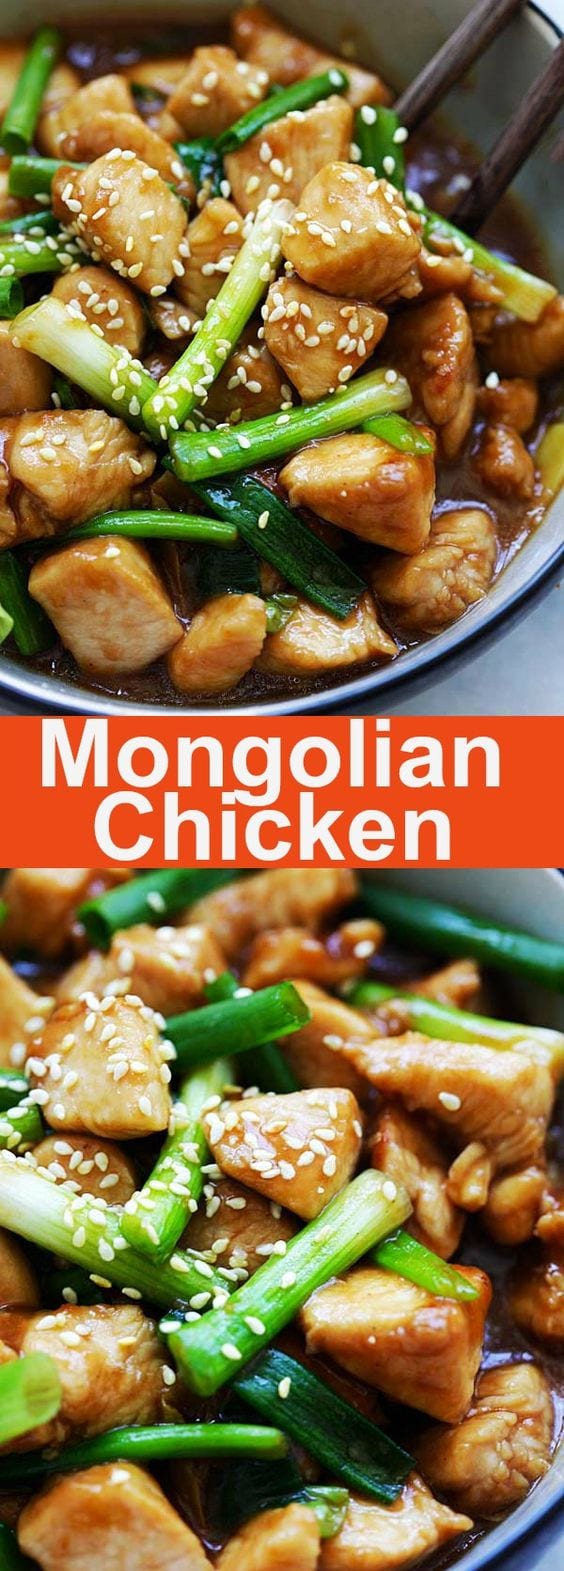 Mongolian Chicken – tender and juicy Chinese chicken stir-fry with scallions and brown sauce. This Mongolian Chicken recipe is so much better than takeout | rasamalaysia.com